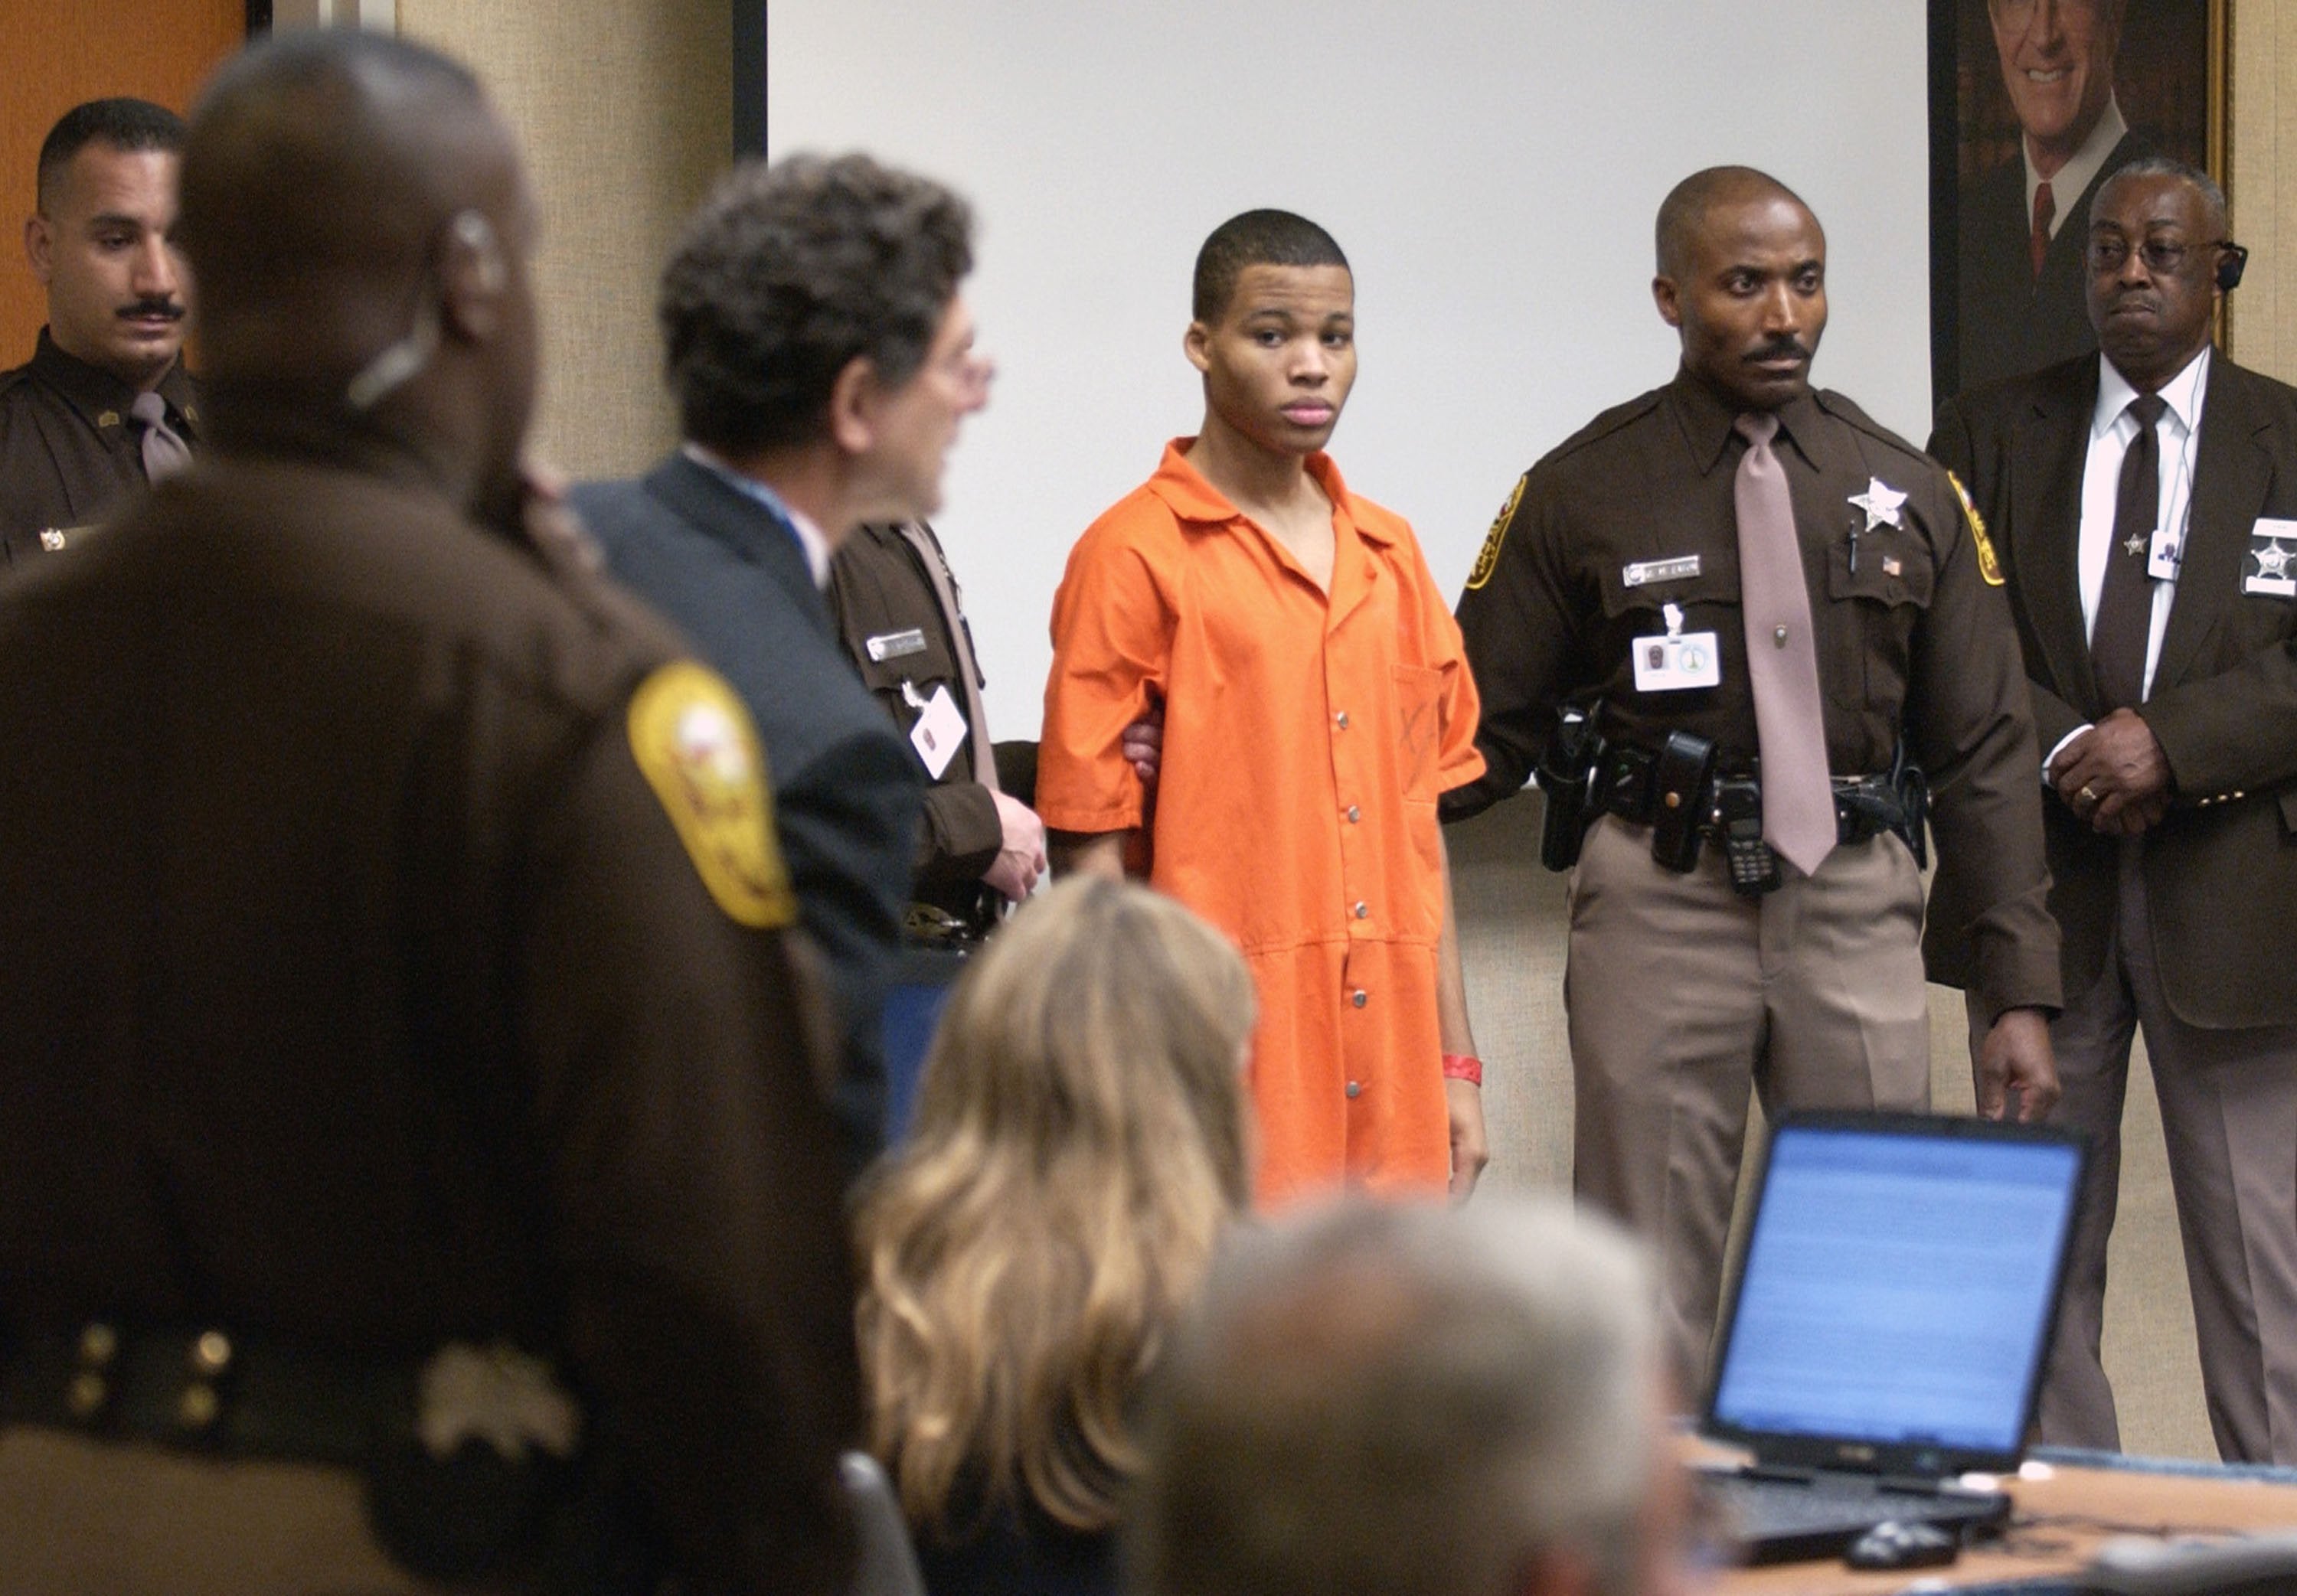 Judge Throws Out Life Sentences for D.C. Sniper Lee Boyd Malvo